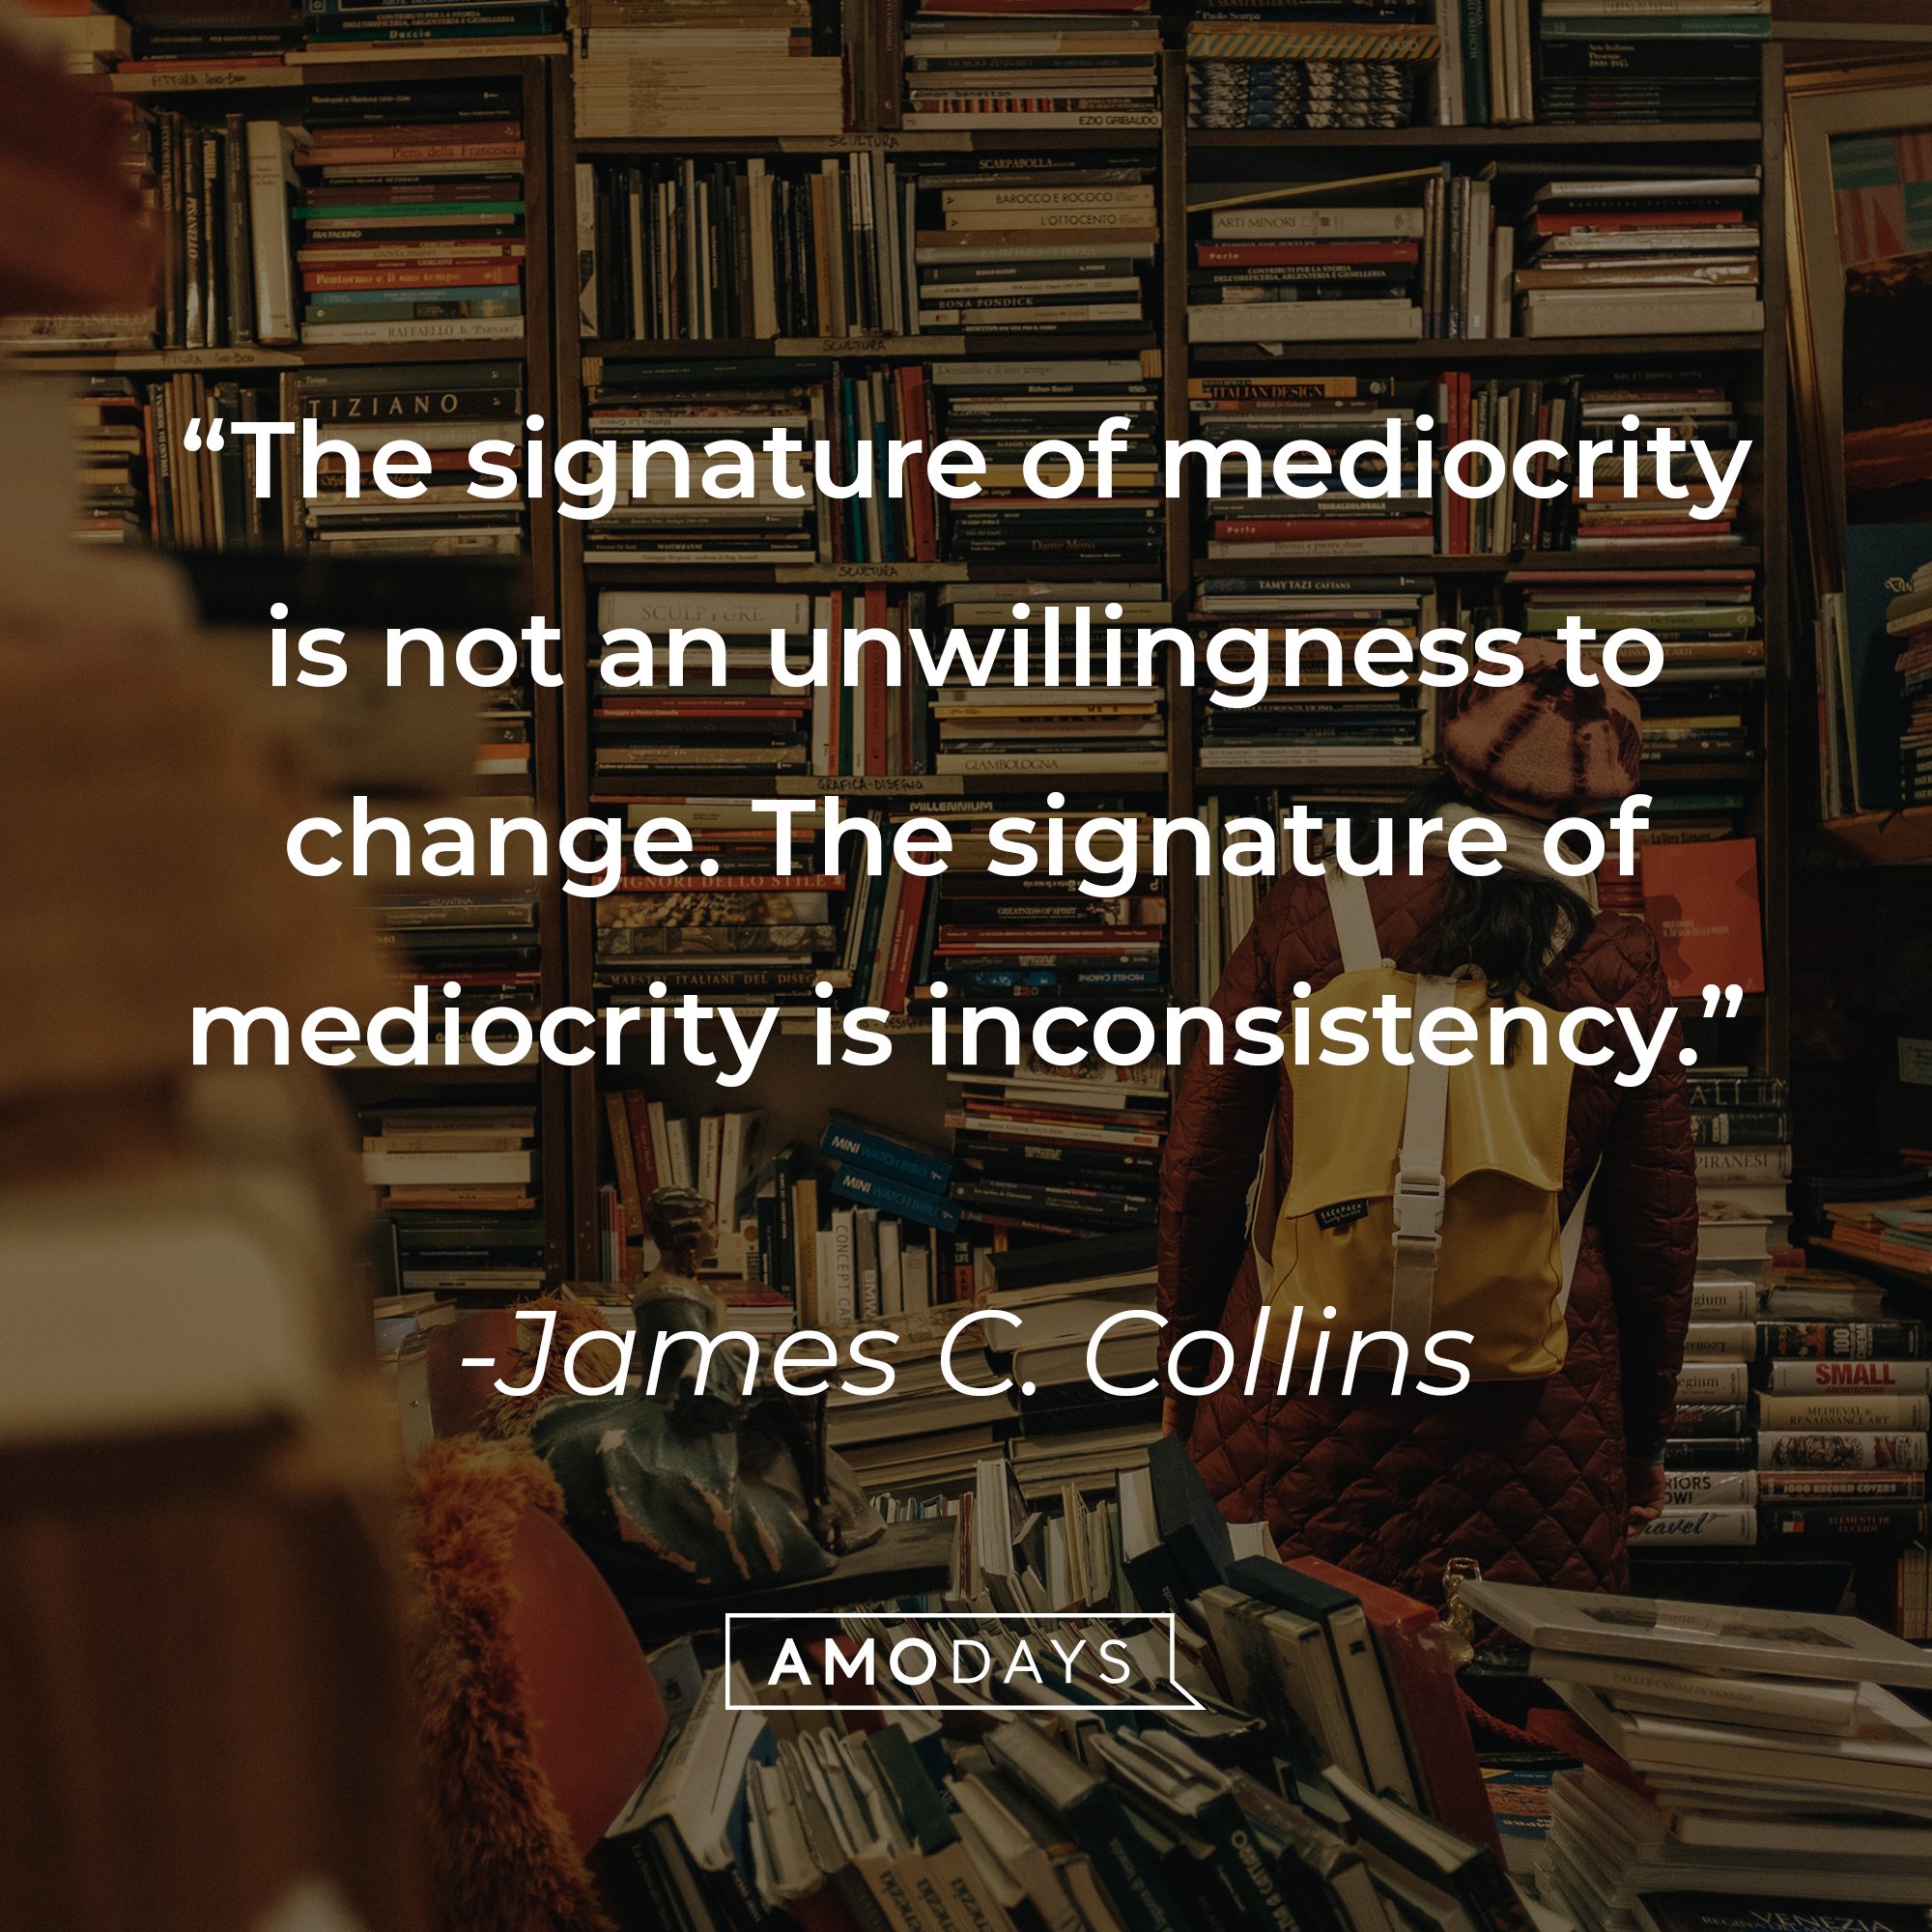 James C. Collins' quote: "The signature of mediocrity is not an unwillingness to change. The signature of mediocrity is inconsistency." | Image: AmoDays